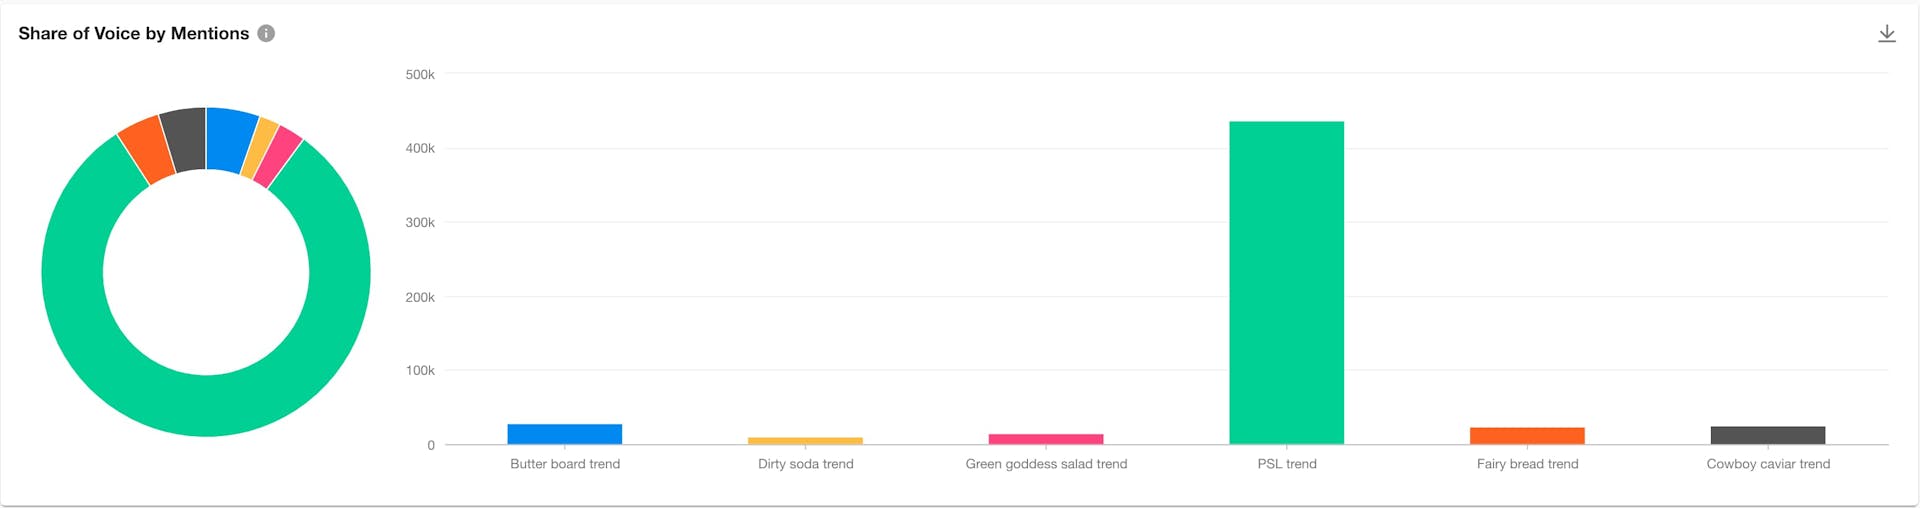 Screenshot from the Meltwater social listening platform of a ring chart and bar graph of shares of voice by mentions of six food trends.